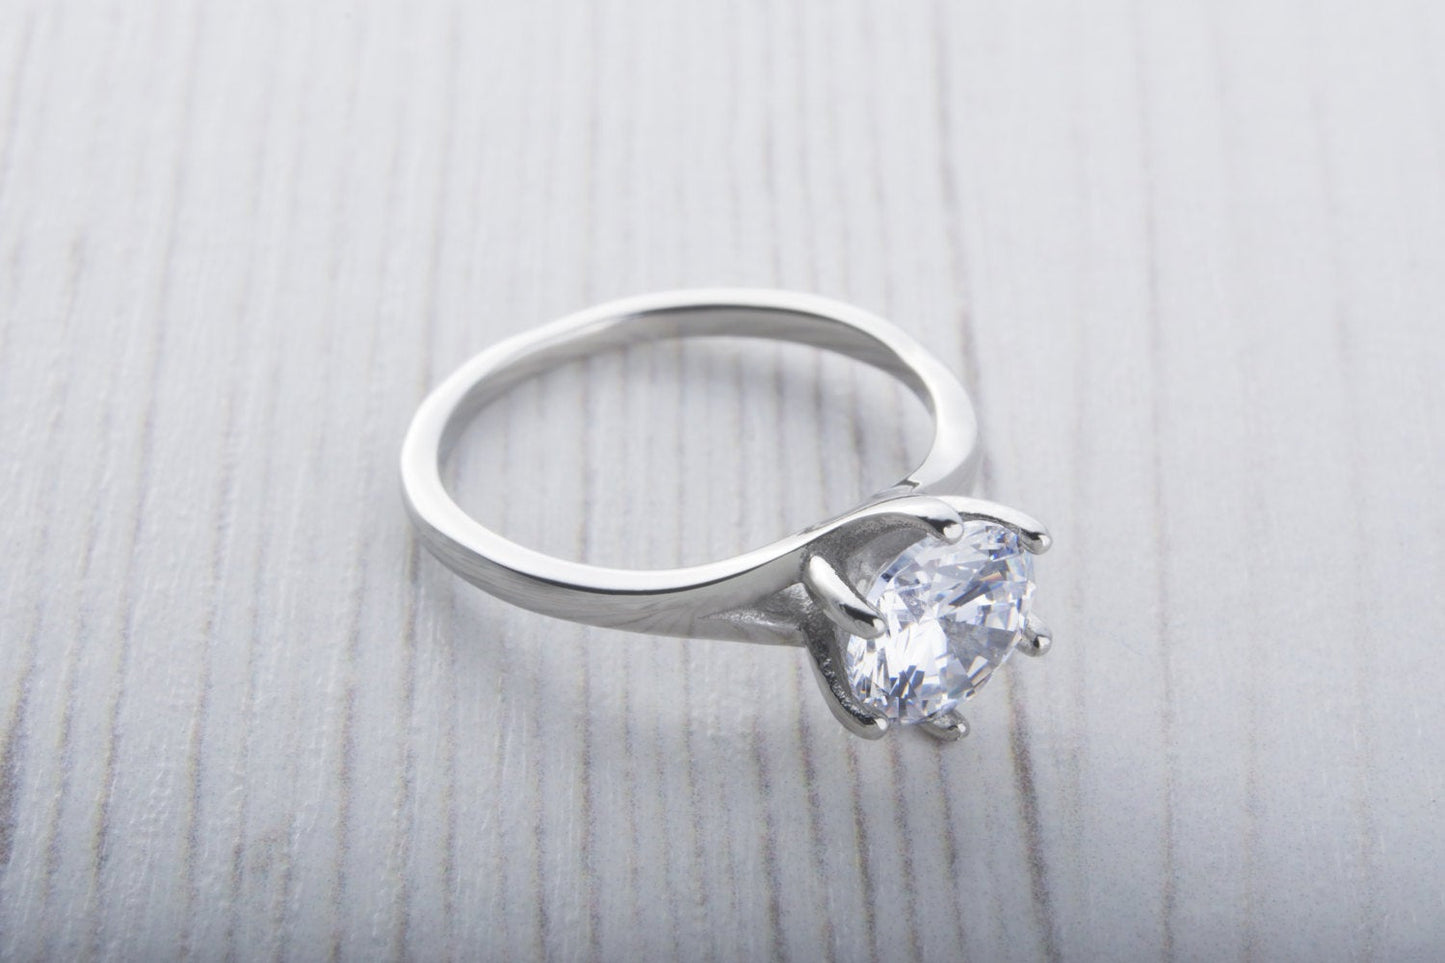 1.5ct Man Made Diamond Simulant Solitaire ring available in white gold or Titanium